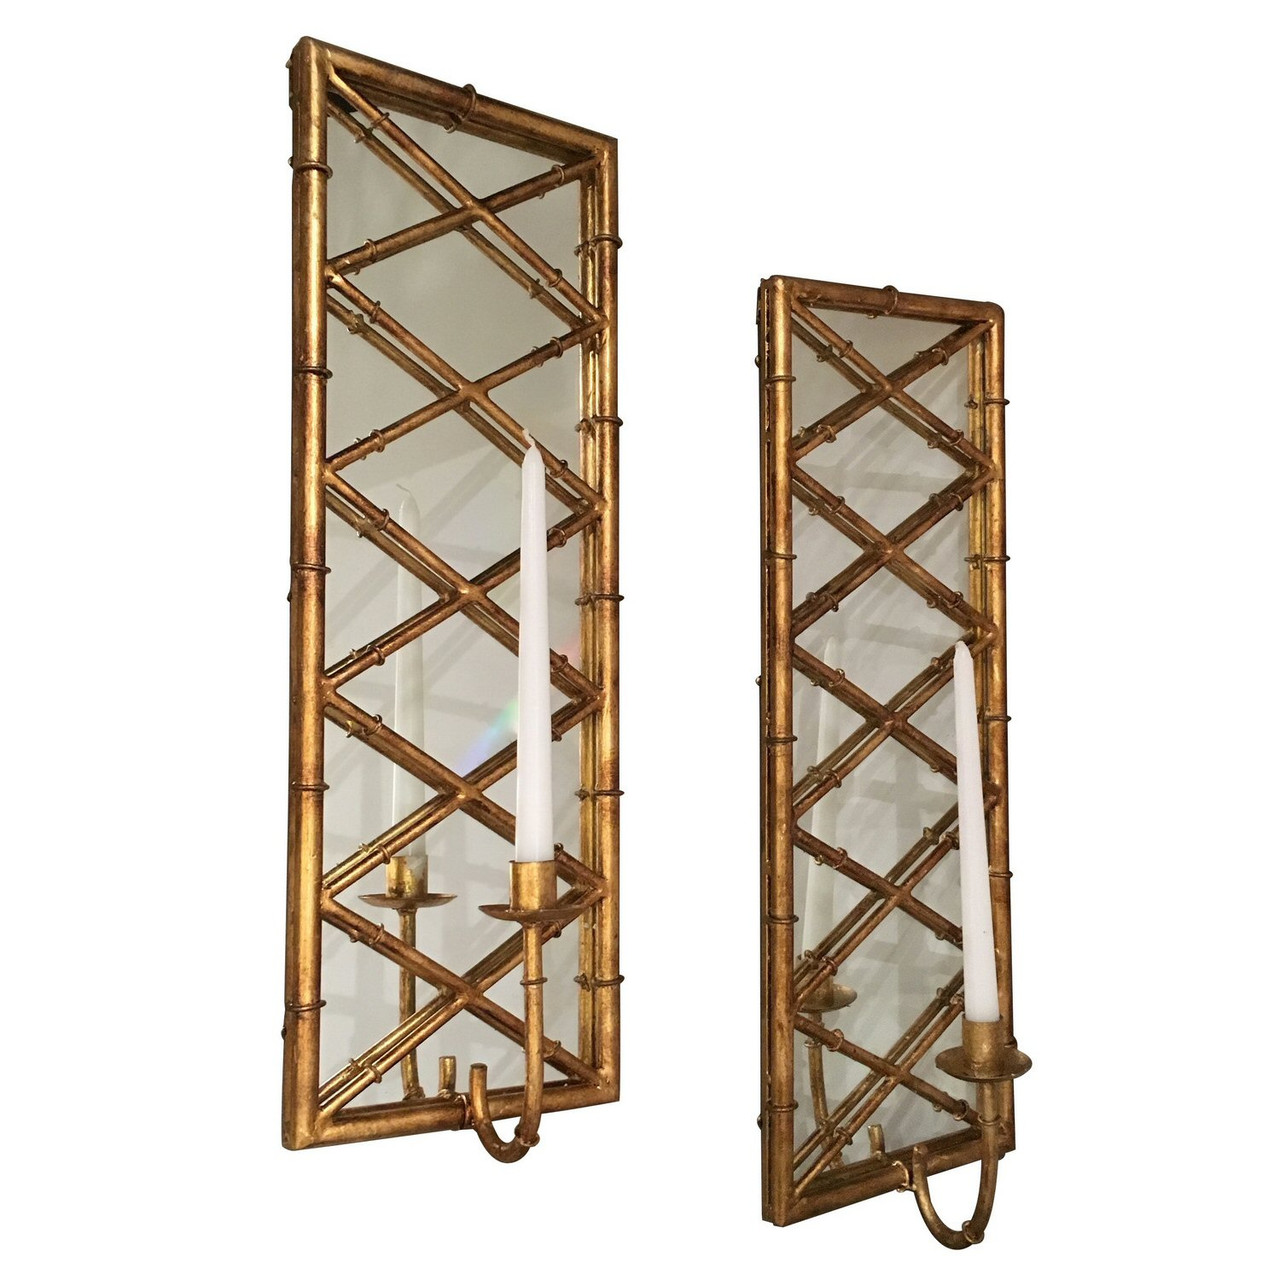 Wrought Iron Mirrored Wall Candle Sconce 10018637